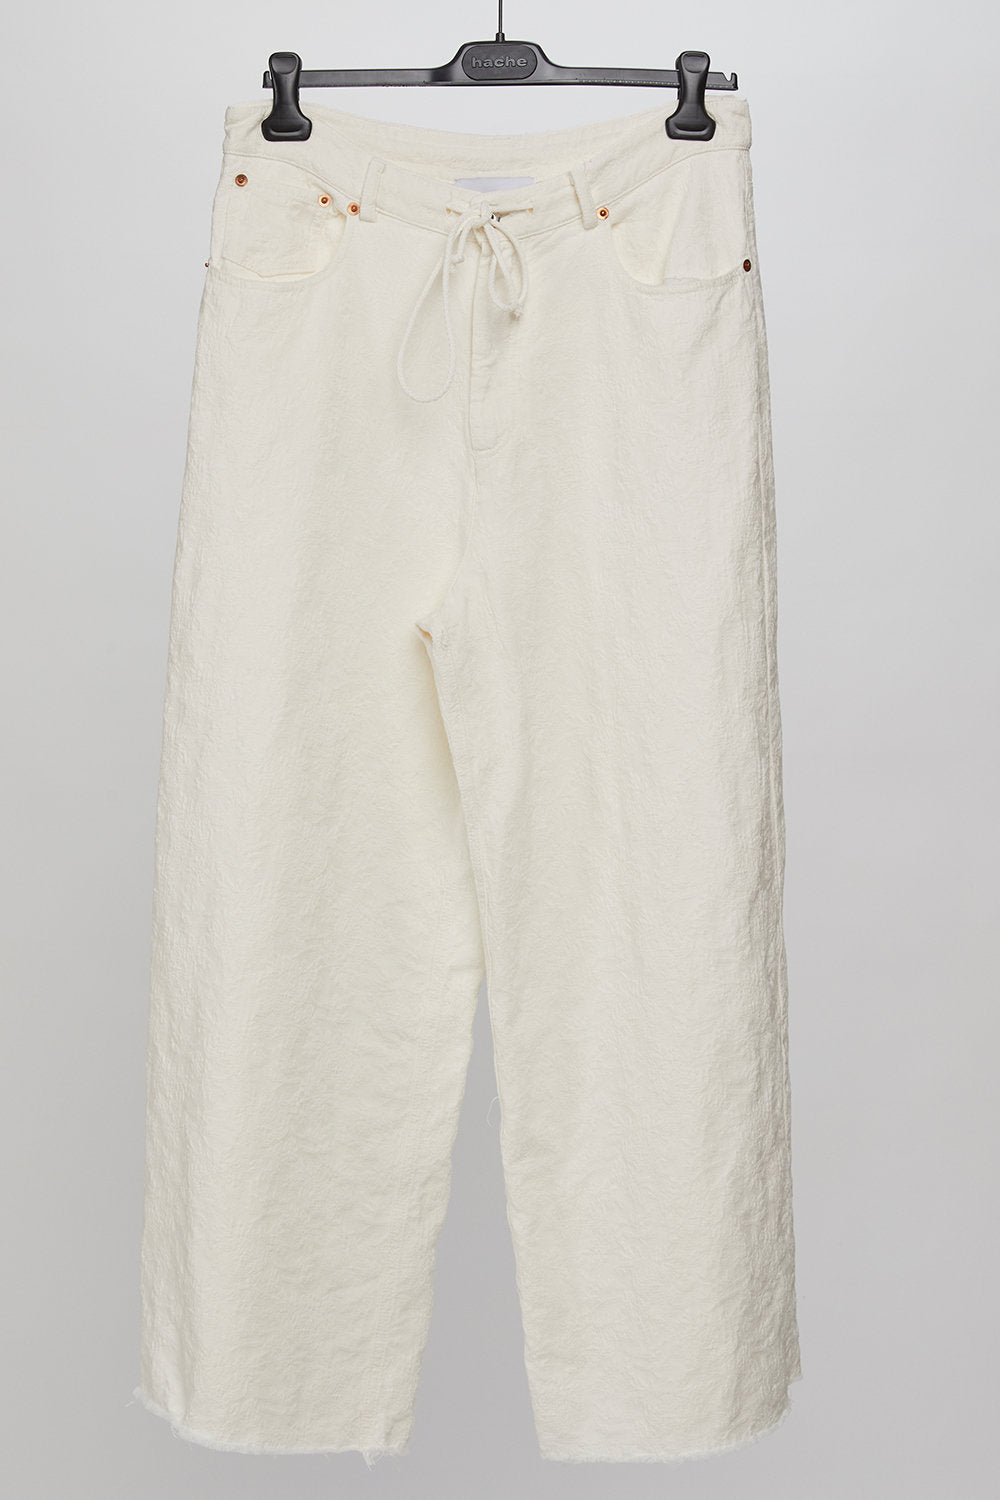 HACHE EMBROIDERED TROUSERS 630842-502 124